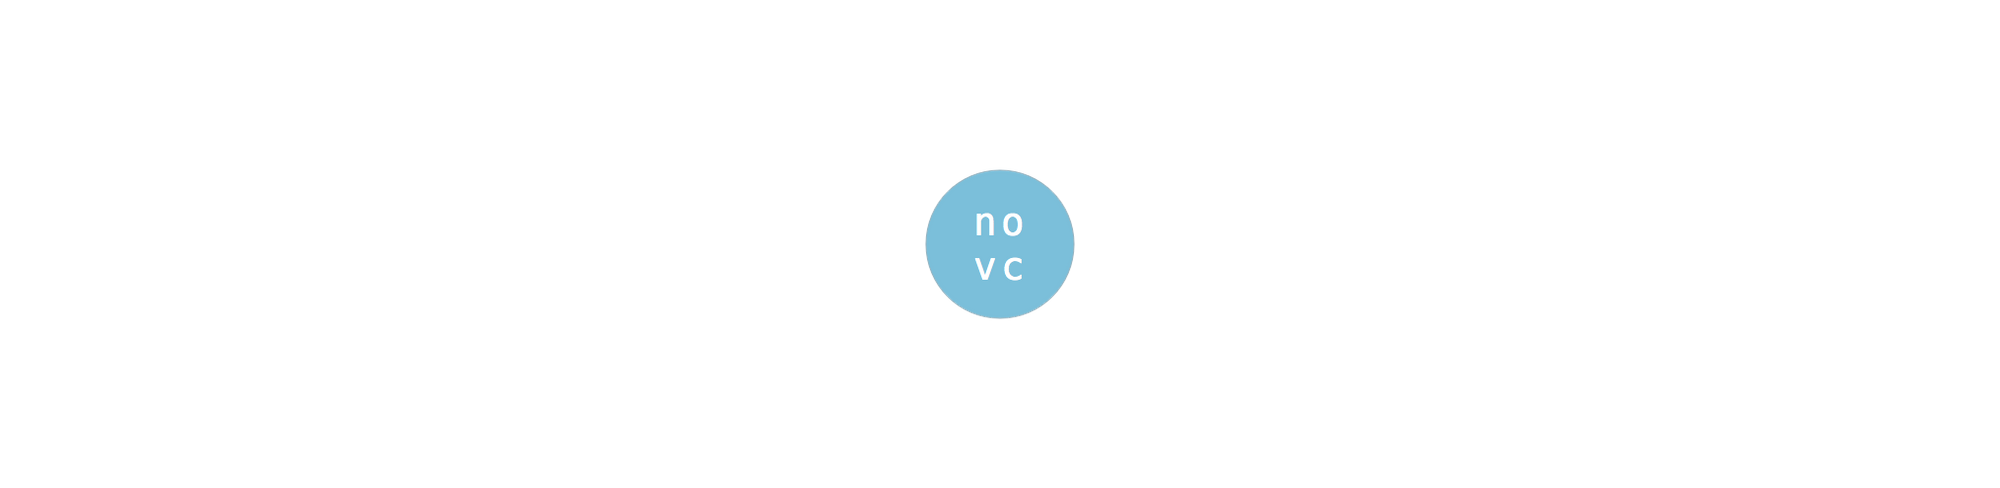 NOVC.org - Normative Organization of Viable Cooperation